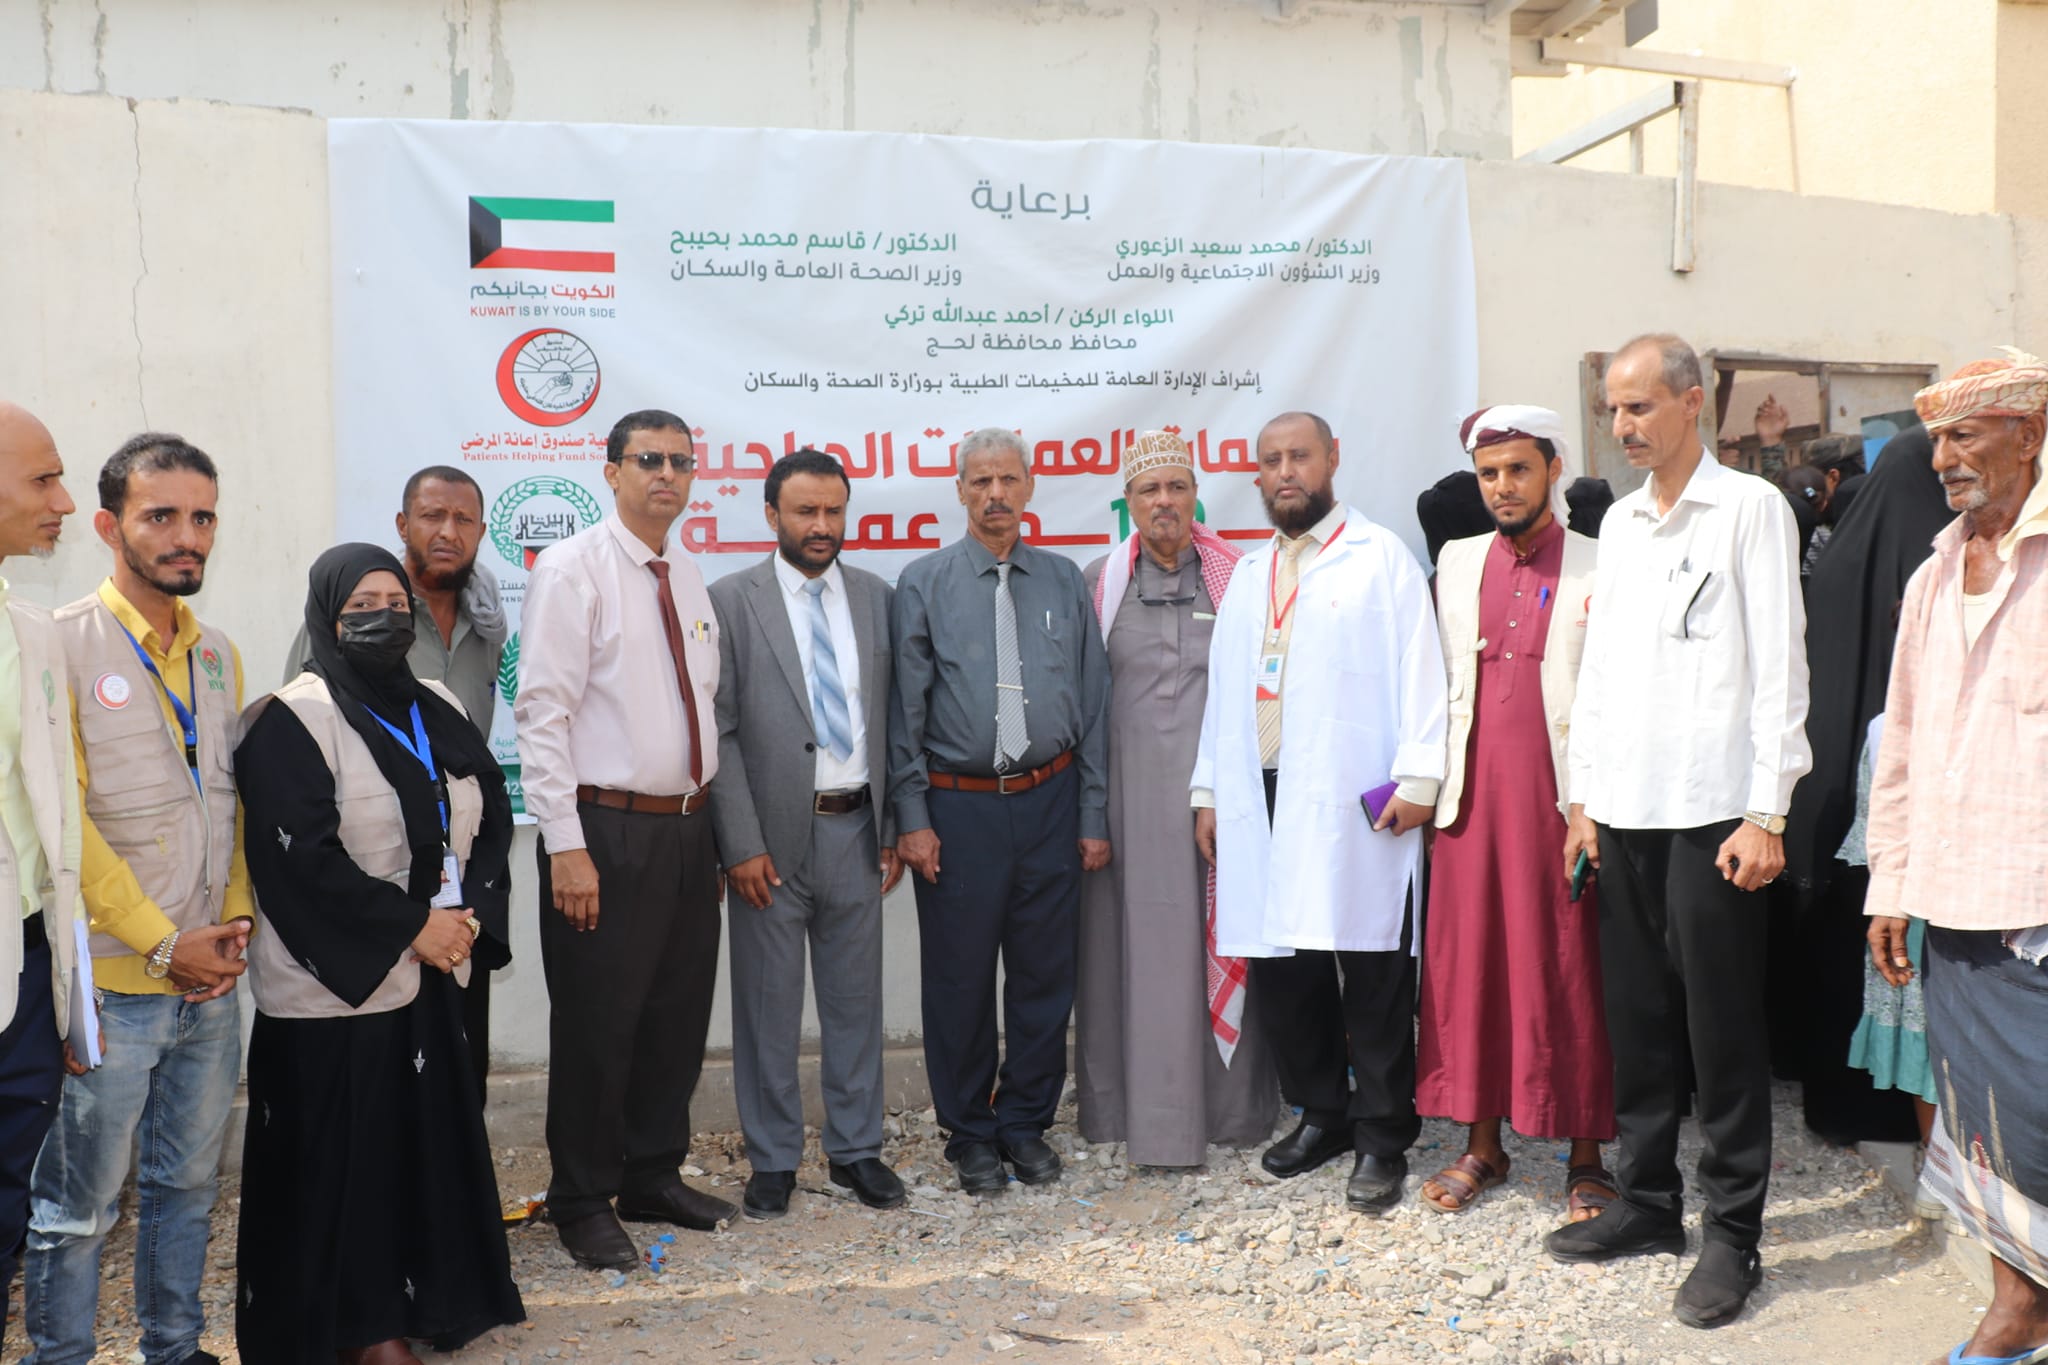 Ibn Khaldoon General Hospital in Lahj Governorate Offers 200 Free Surgeries